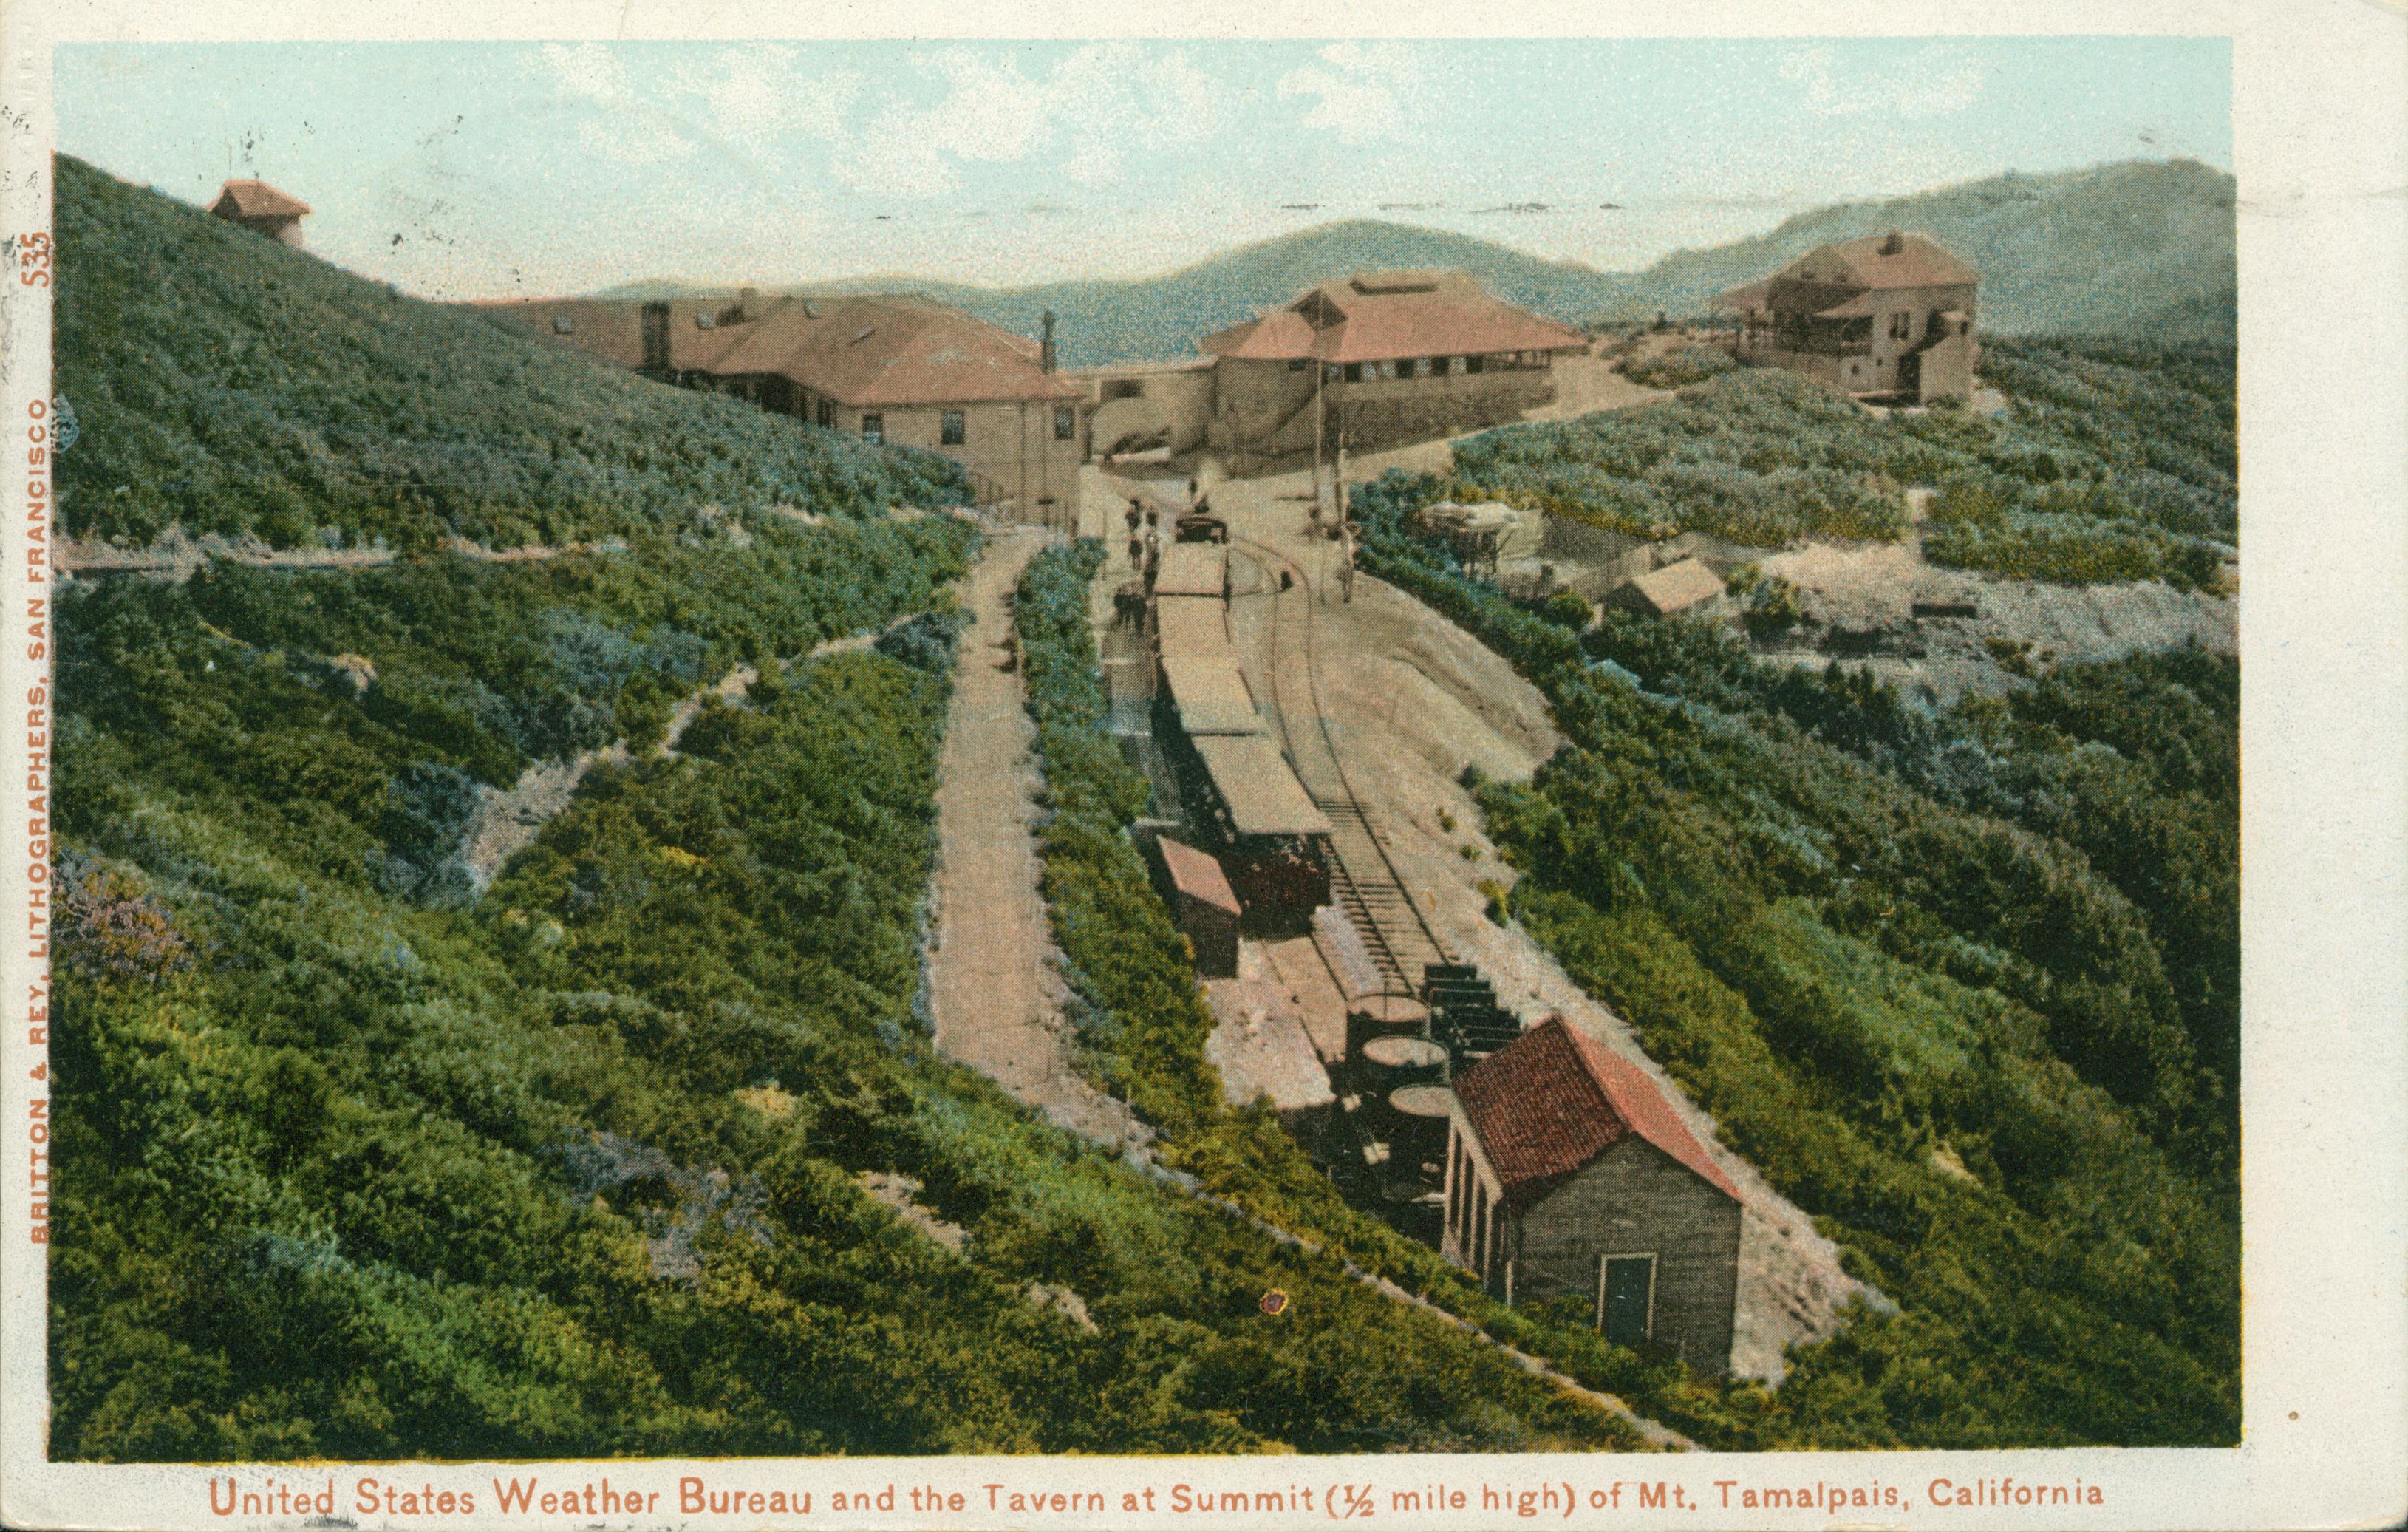 Mountain side with buildings of the United State Weather Bureau and the Tavern at the Summit of Mt. Tamalpais